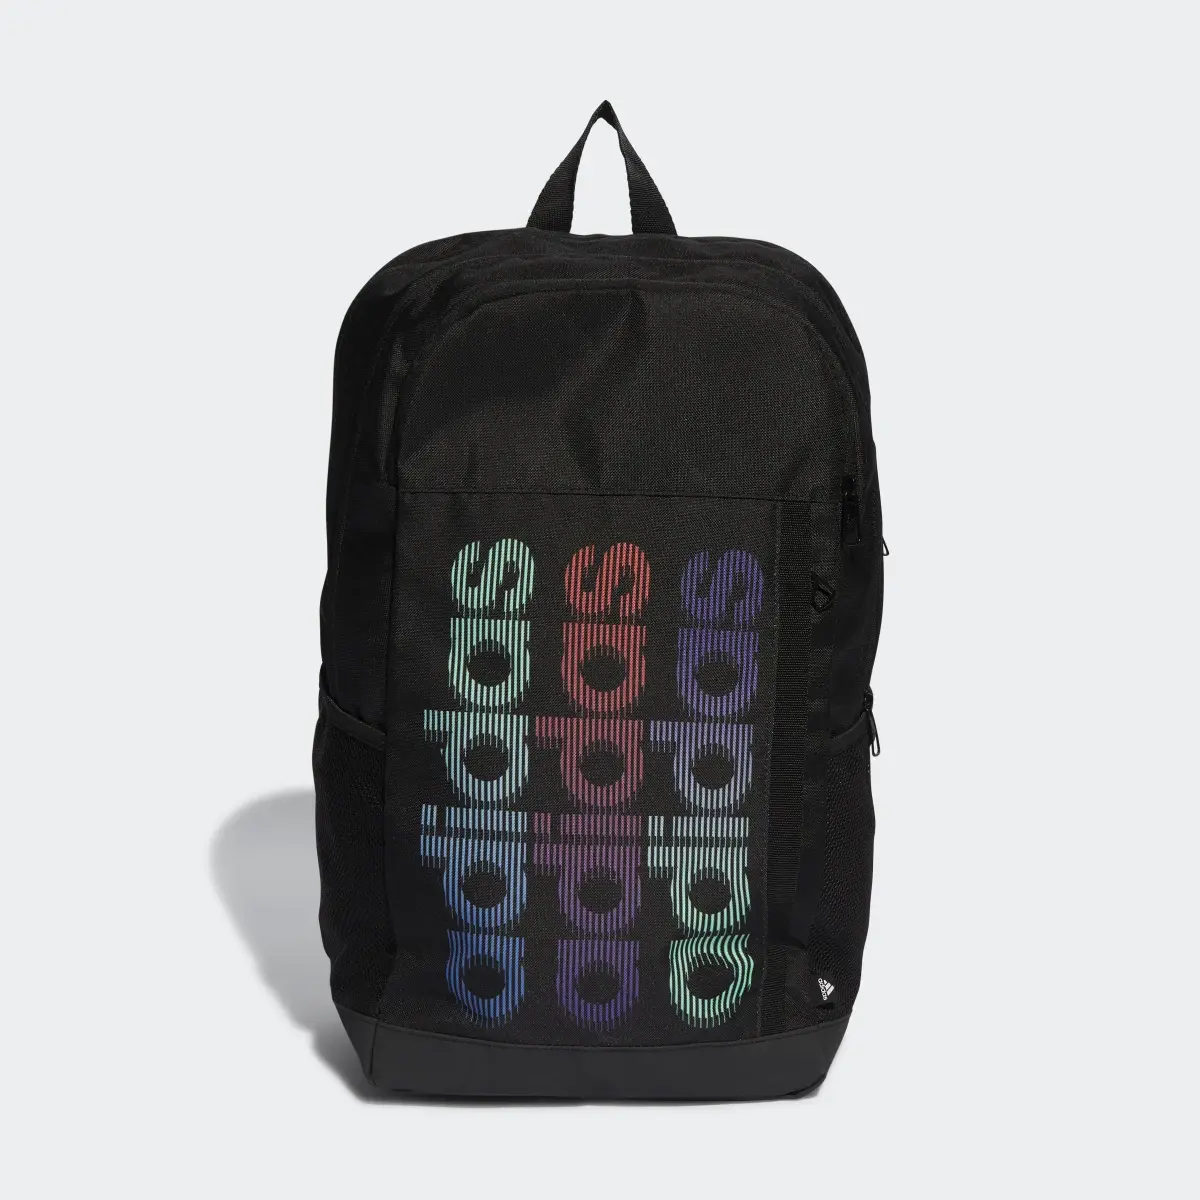 Adidas Motion Linear Graphic Backpack. 2